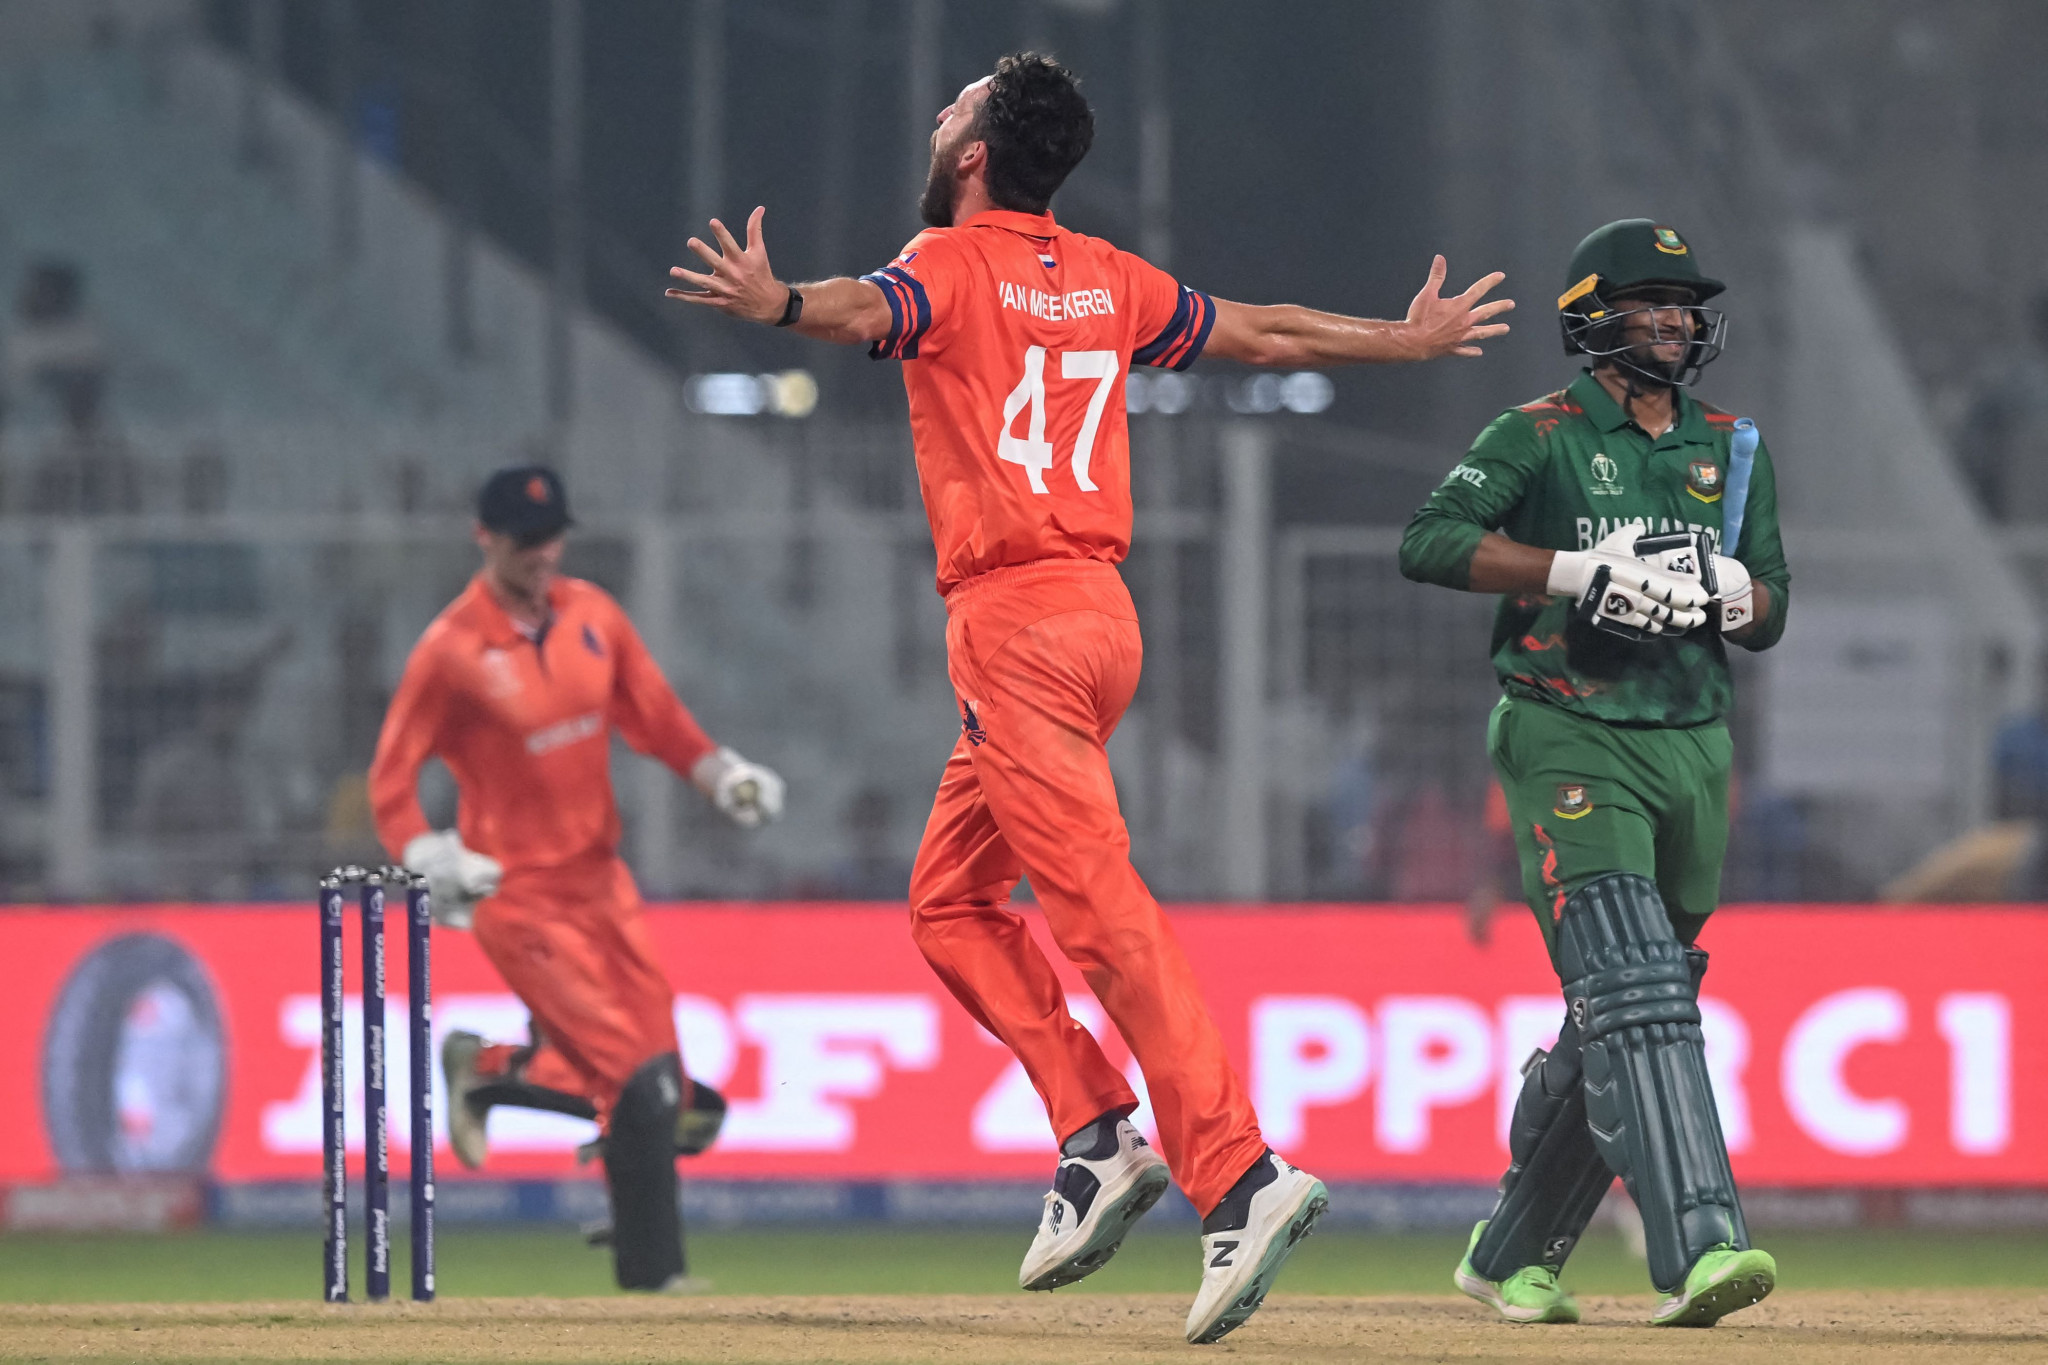 Paul van Meekeren, centre, was player of the match for The Netherlands against Bangladesh as he ended with figures of 4-23 ©Getty Images